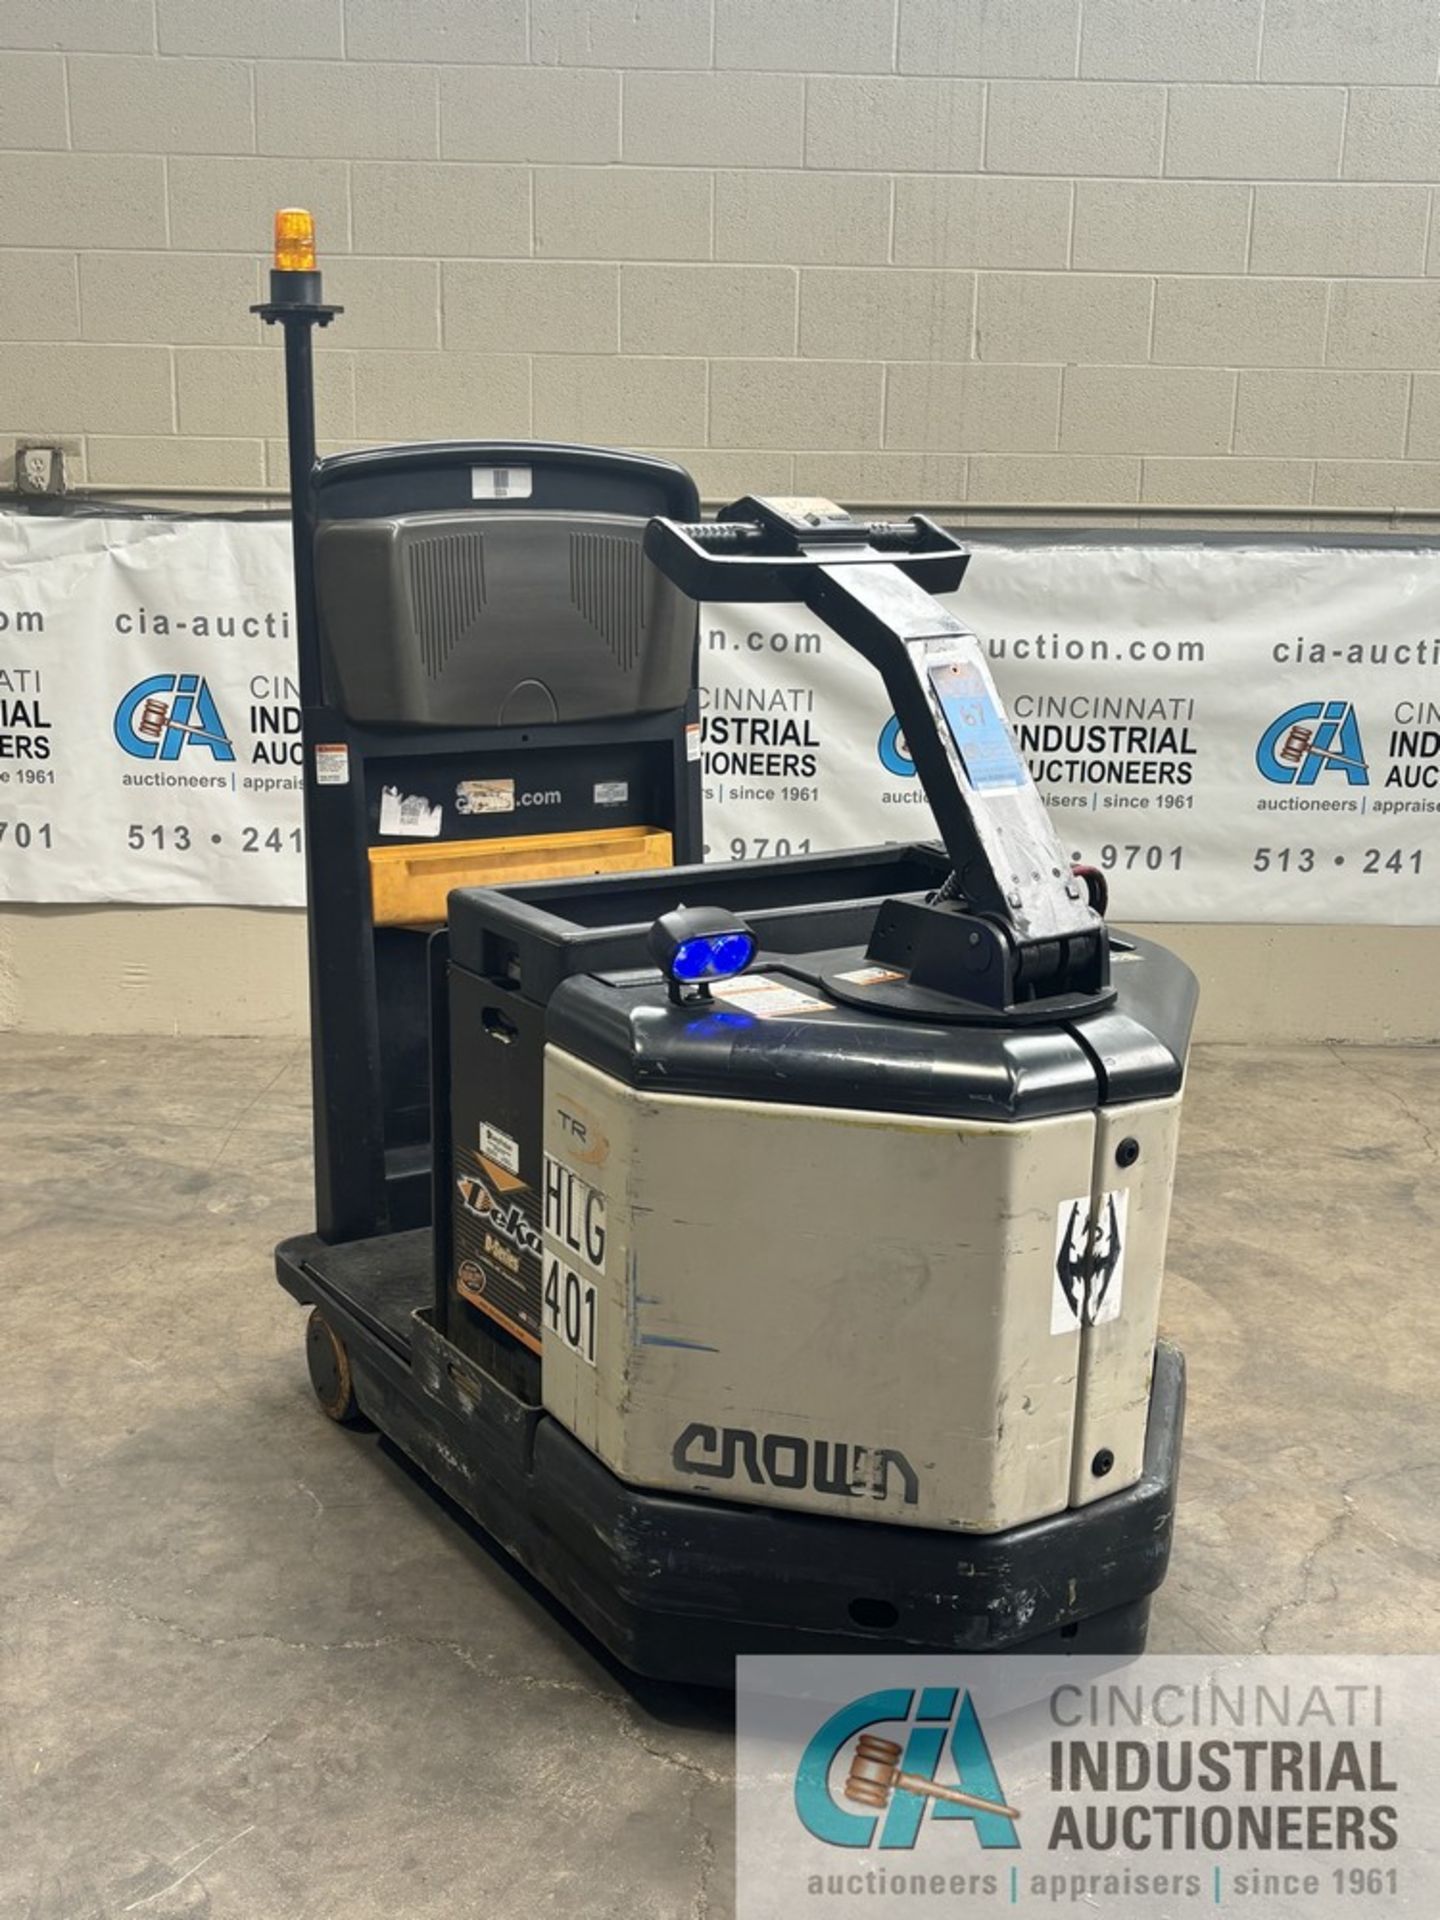 2016 CROWN MODEL TR4500 SERIES STAND-UP ELECTRIC TUGGER; S/N 10011624, 24-VOLT, 3,543 HOURS SHOWING,